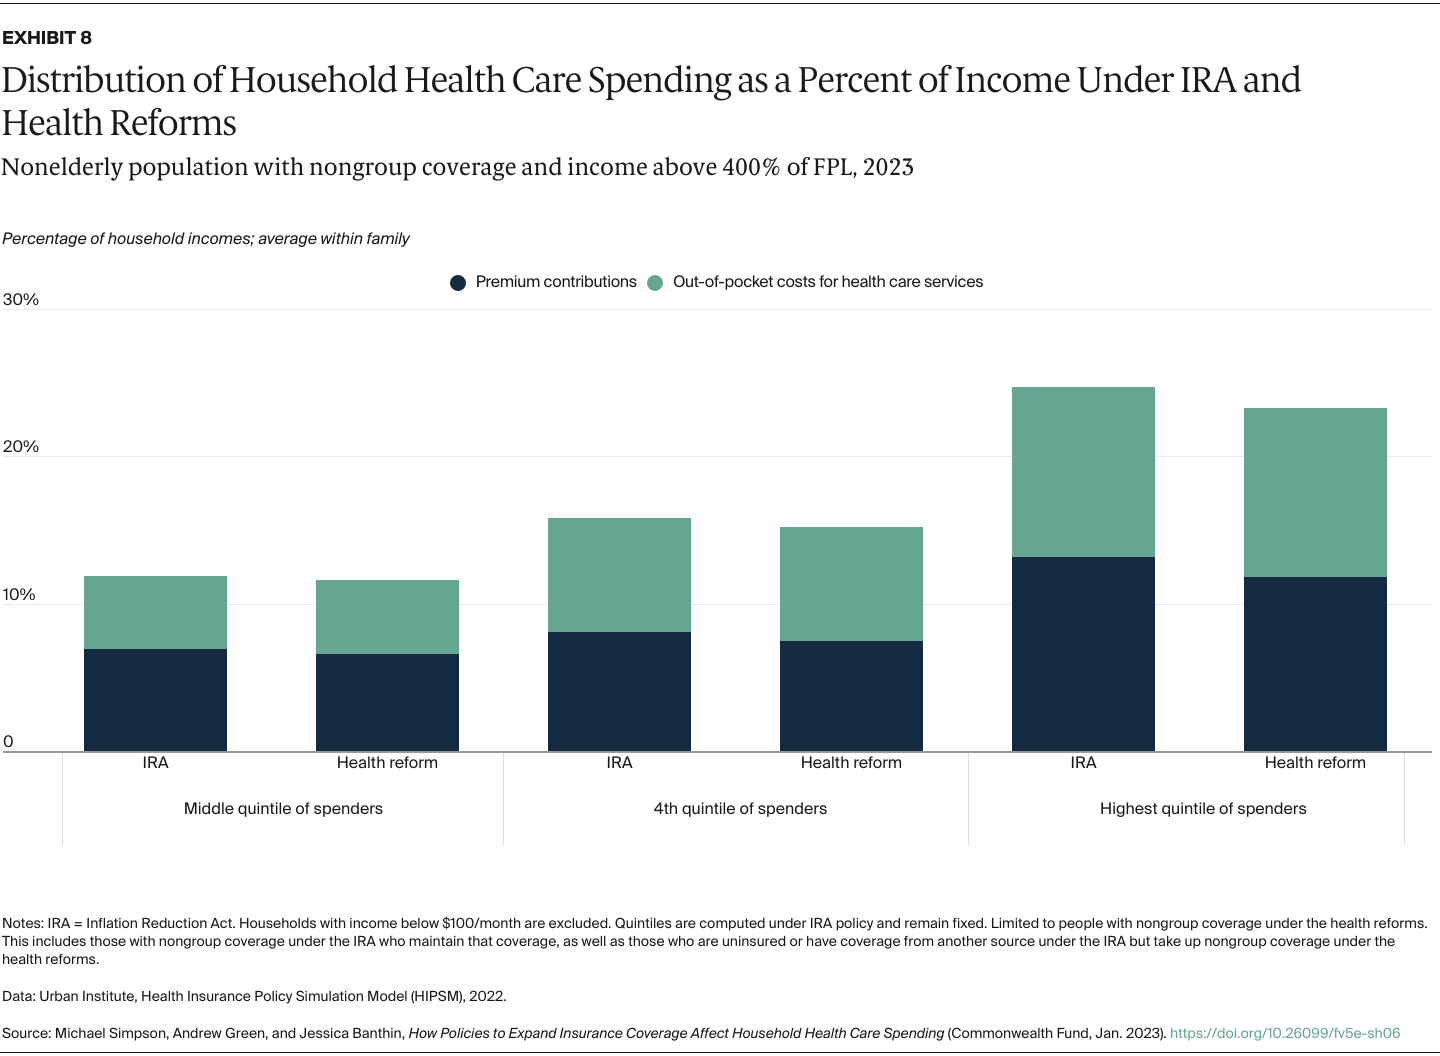 Simpson_policies_expand_coverage_household_spending_Exhibit_08